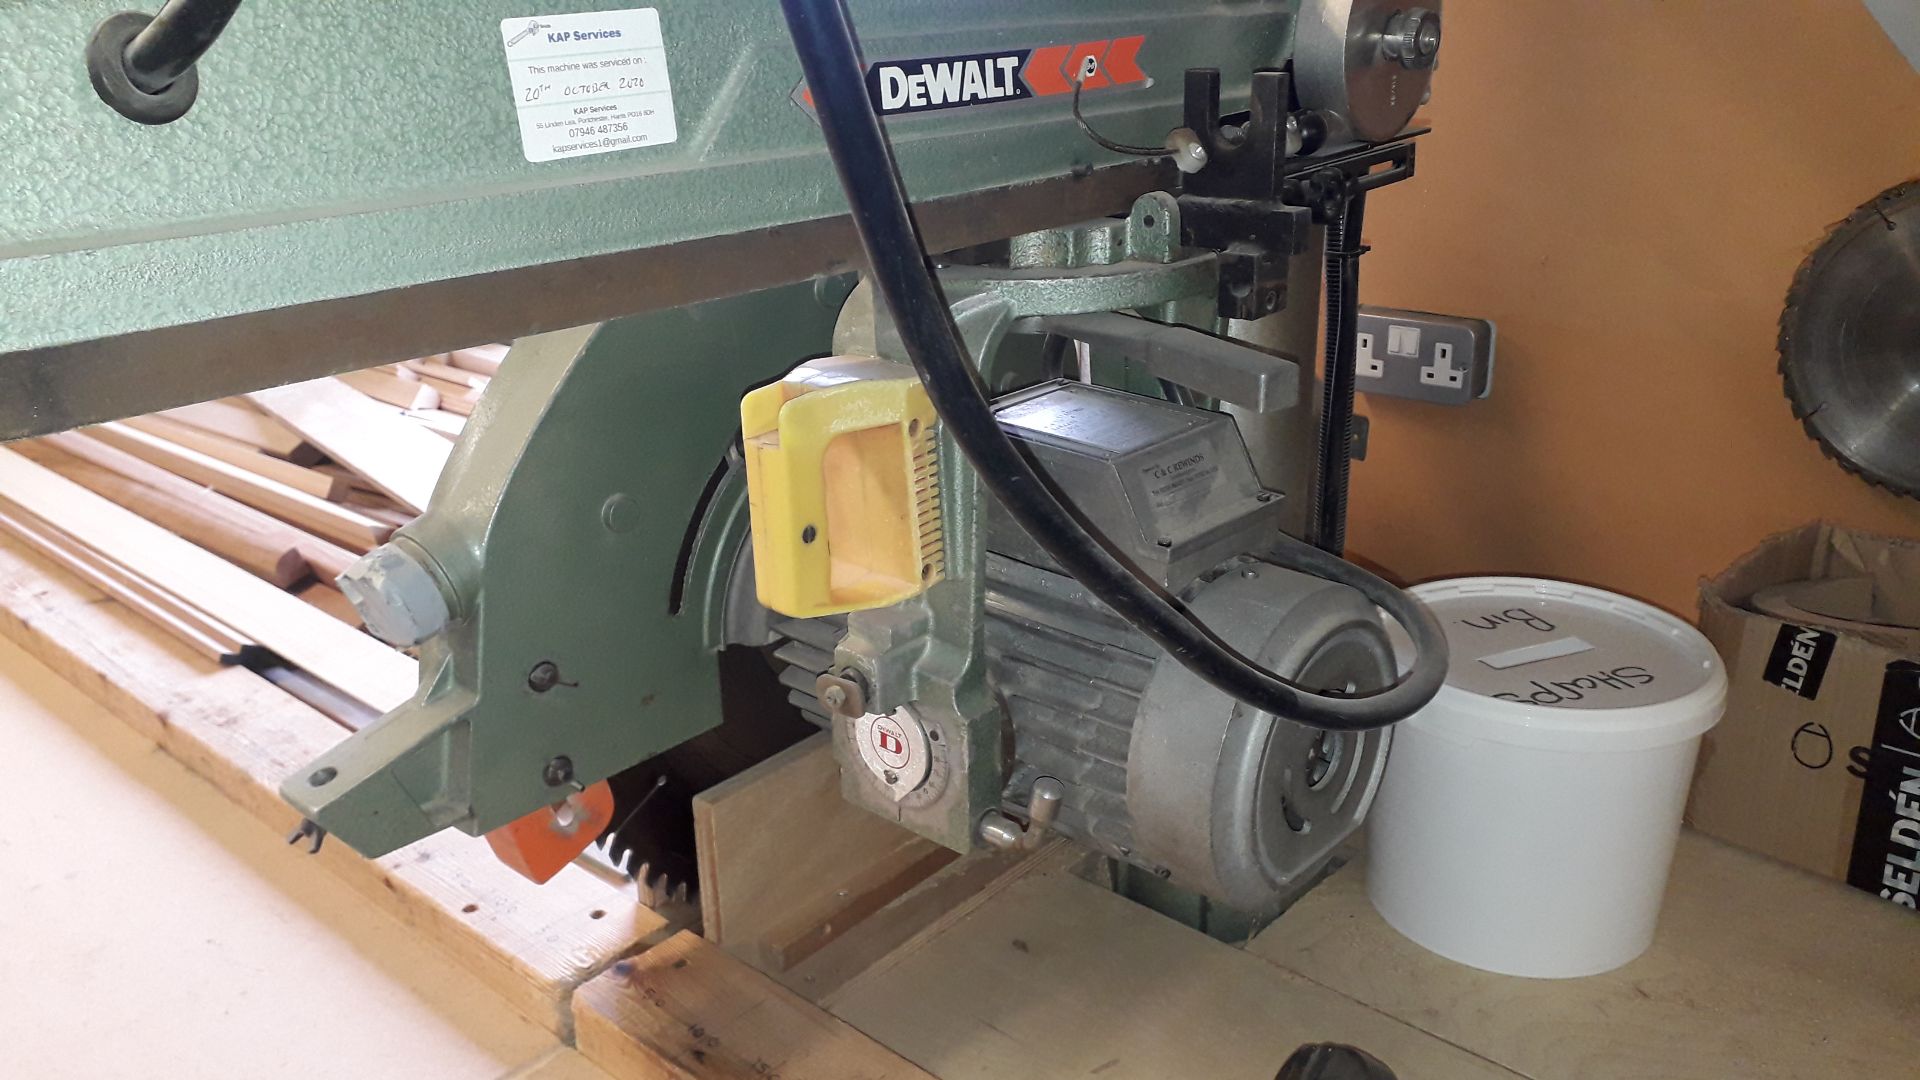 Dewalt 1635/6L Radial Arm Saw and Timber Constructed Work Bench (Timber stock excluded) – To Be - Image 3 of 6